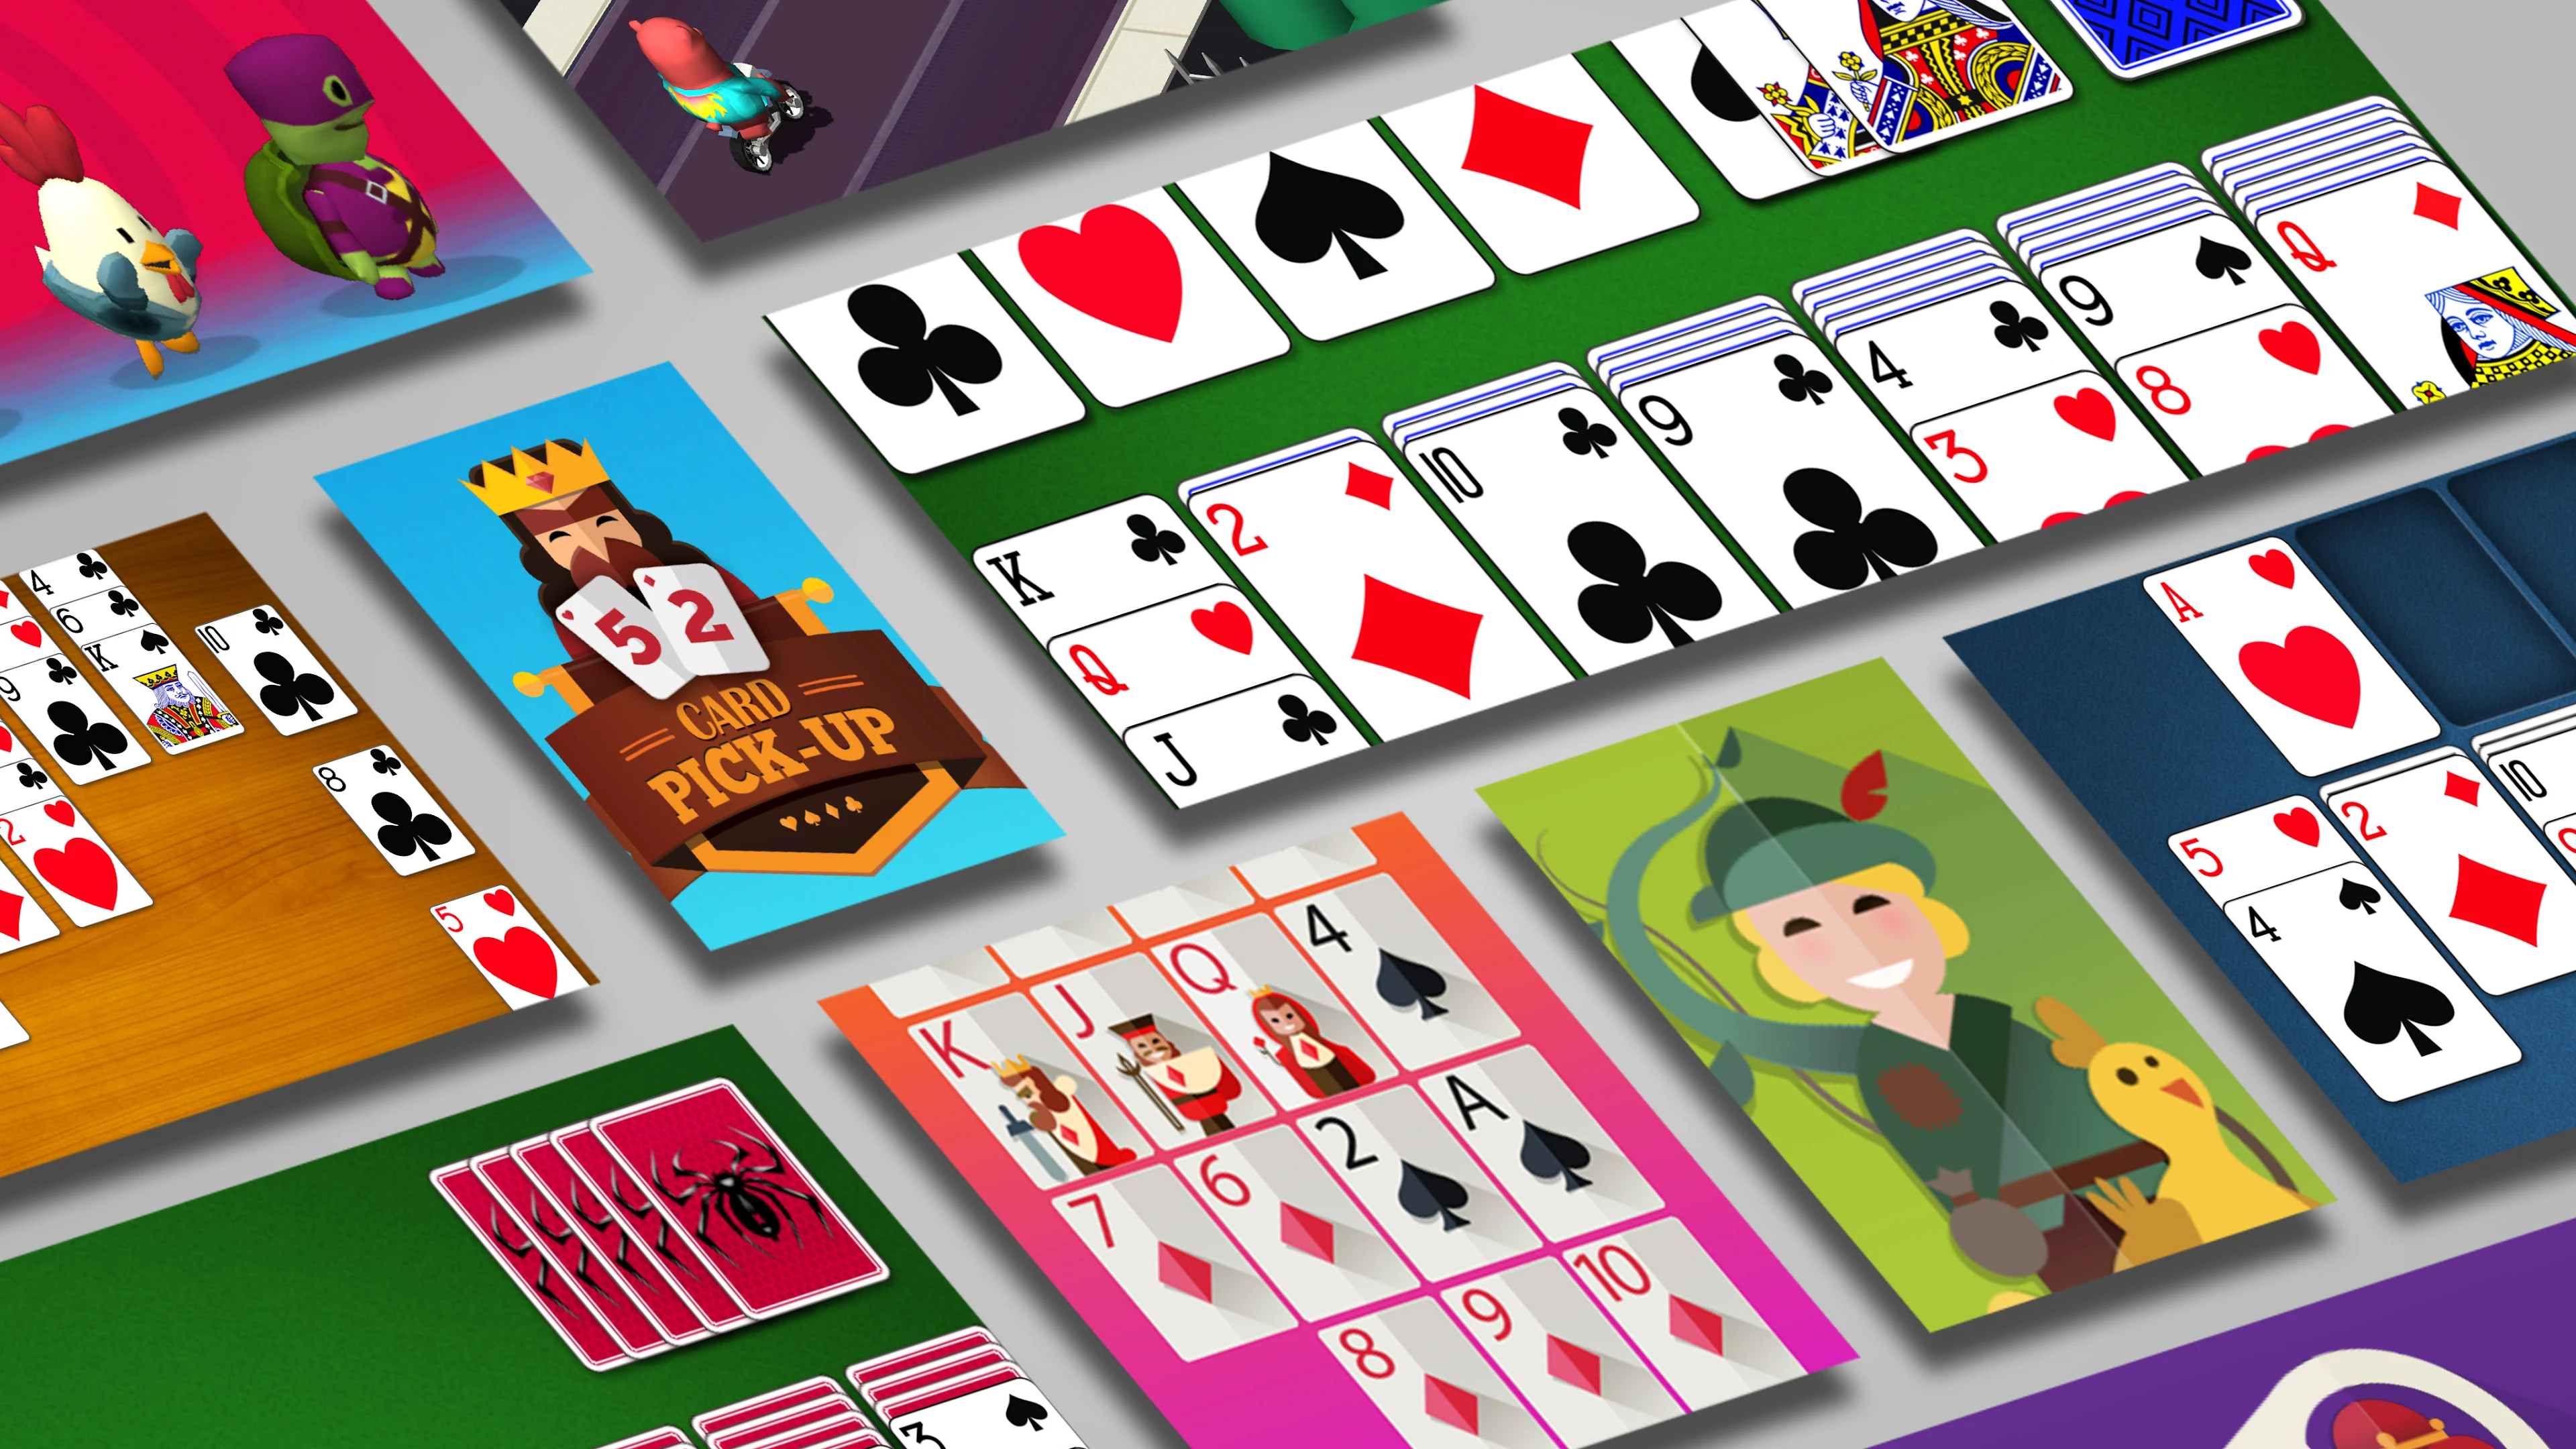 Apps by MobilityWare on Google - Solitaire